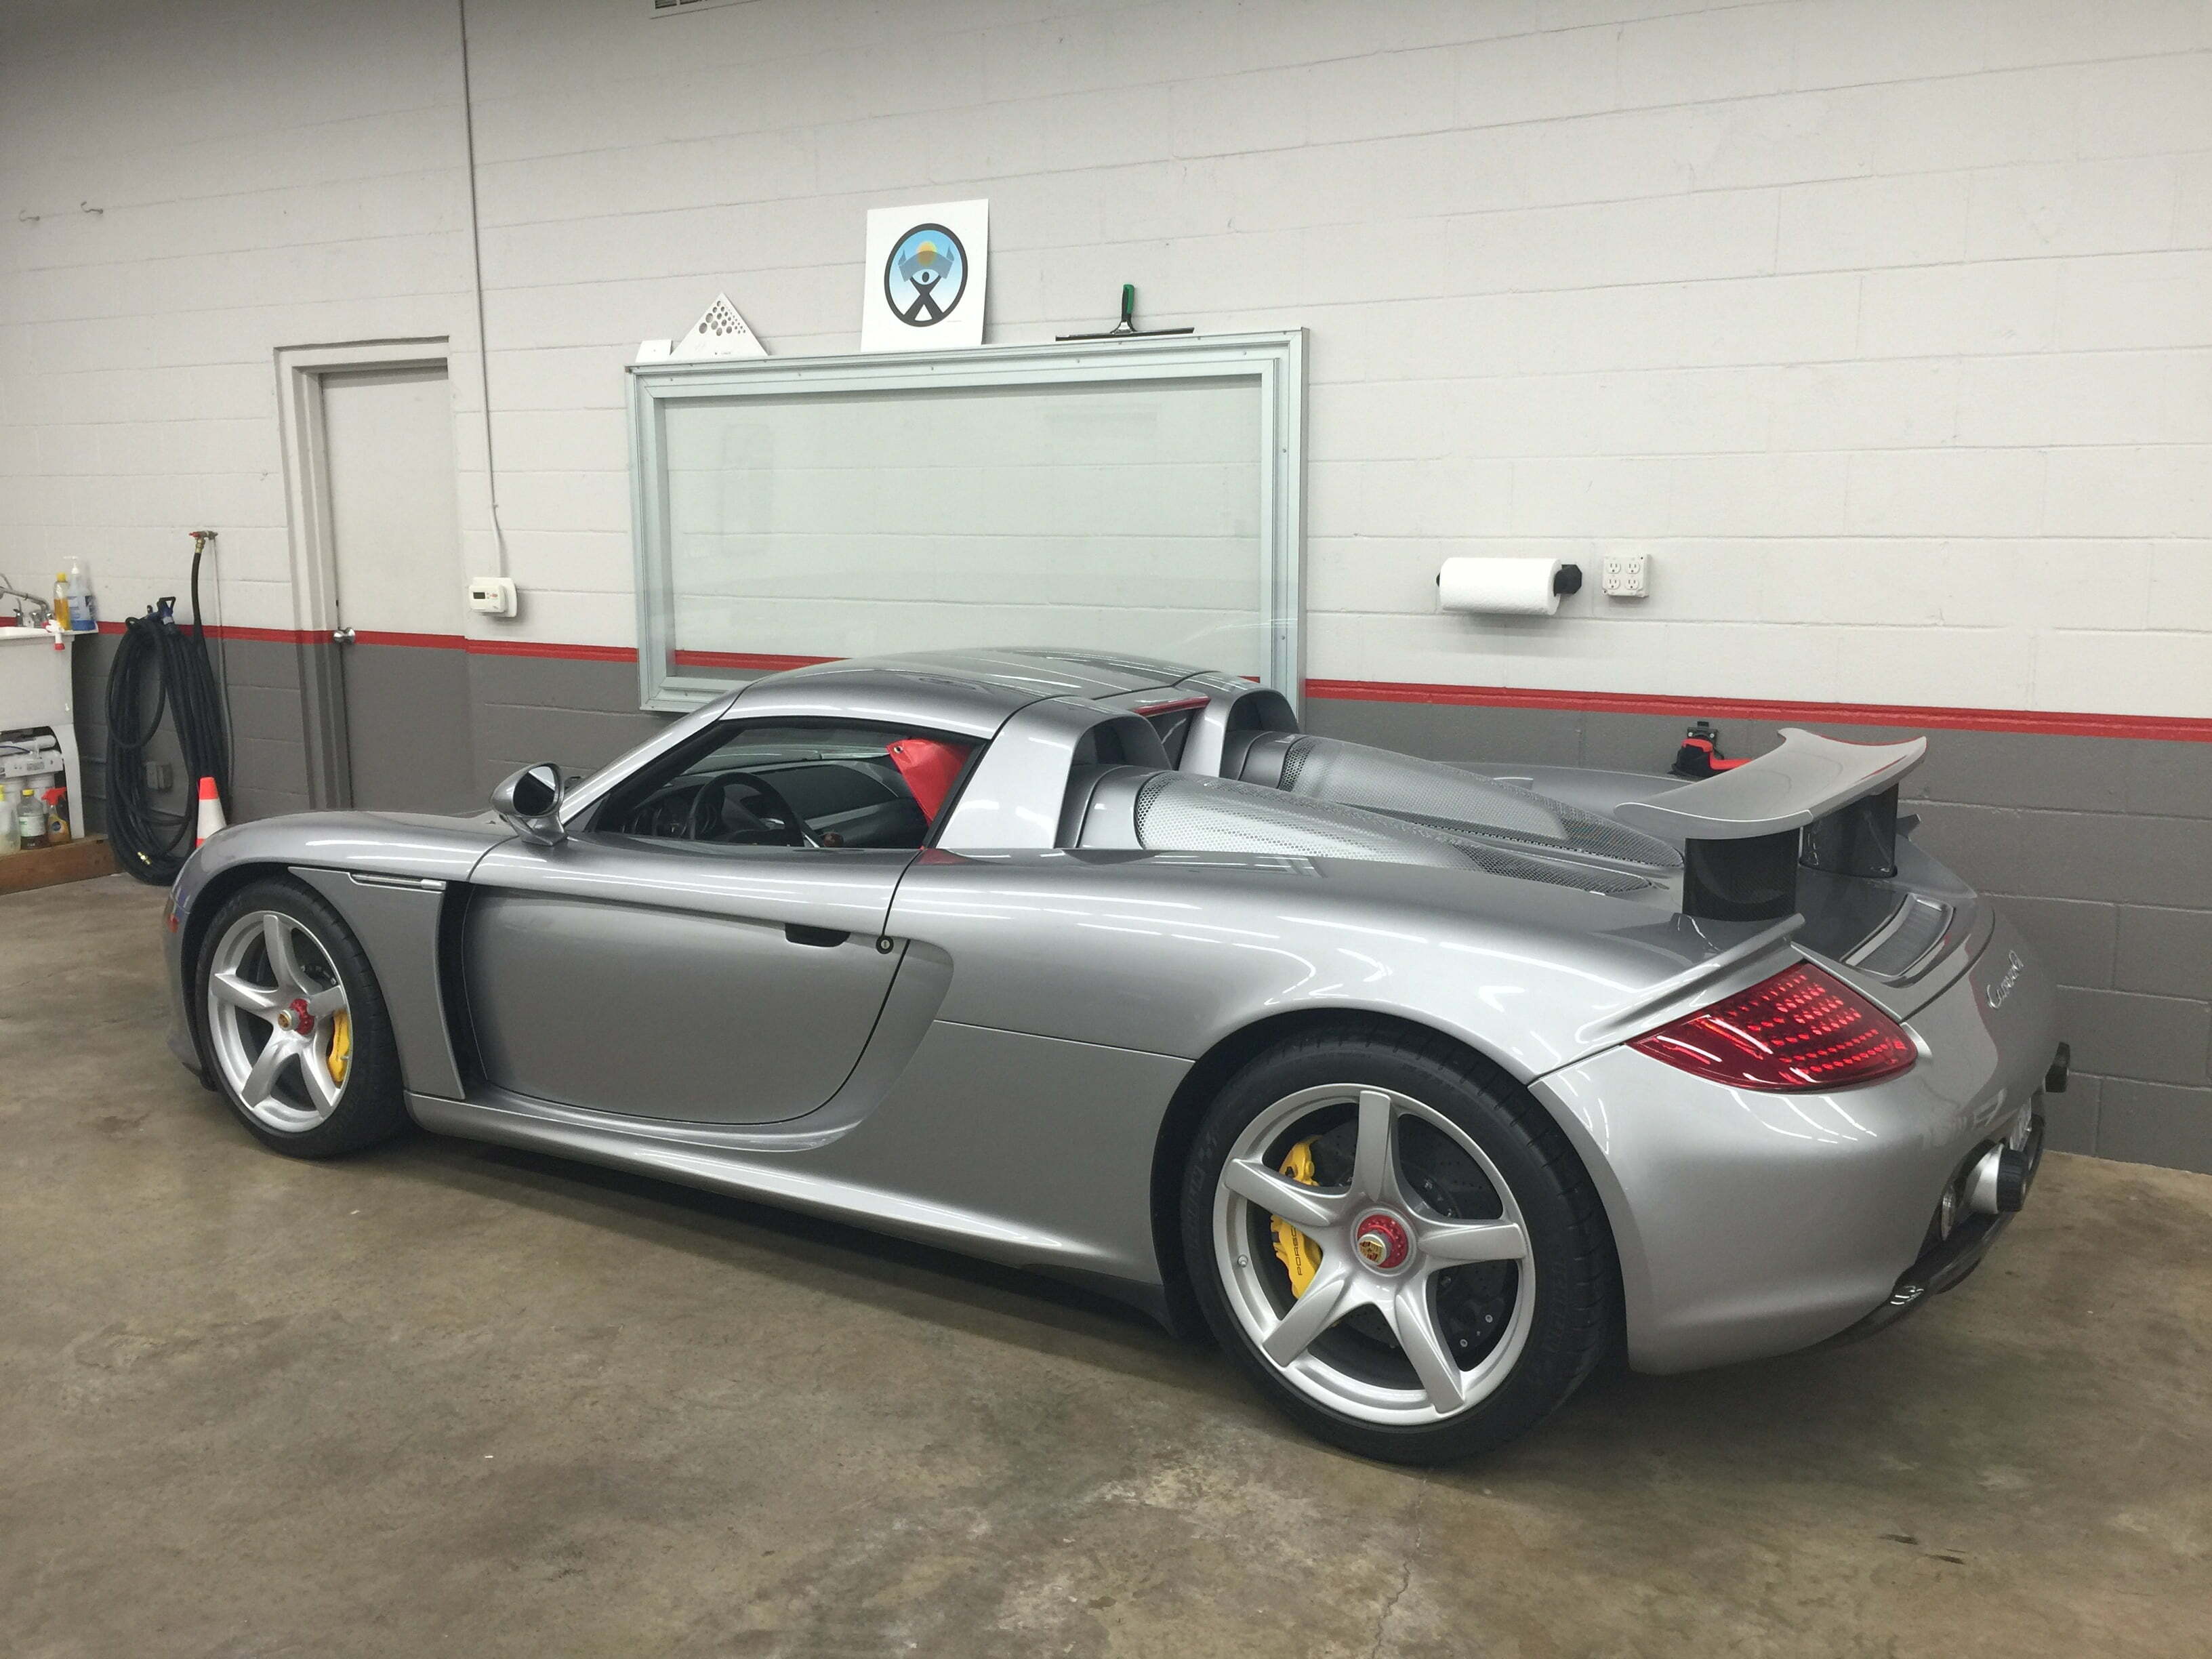 Paint protection on Silver sports car